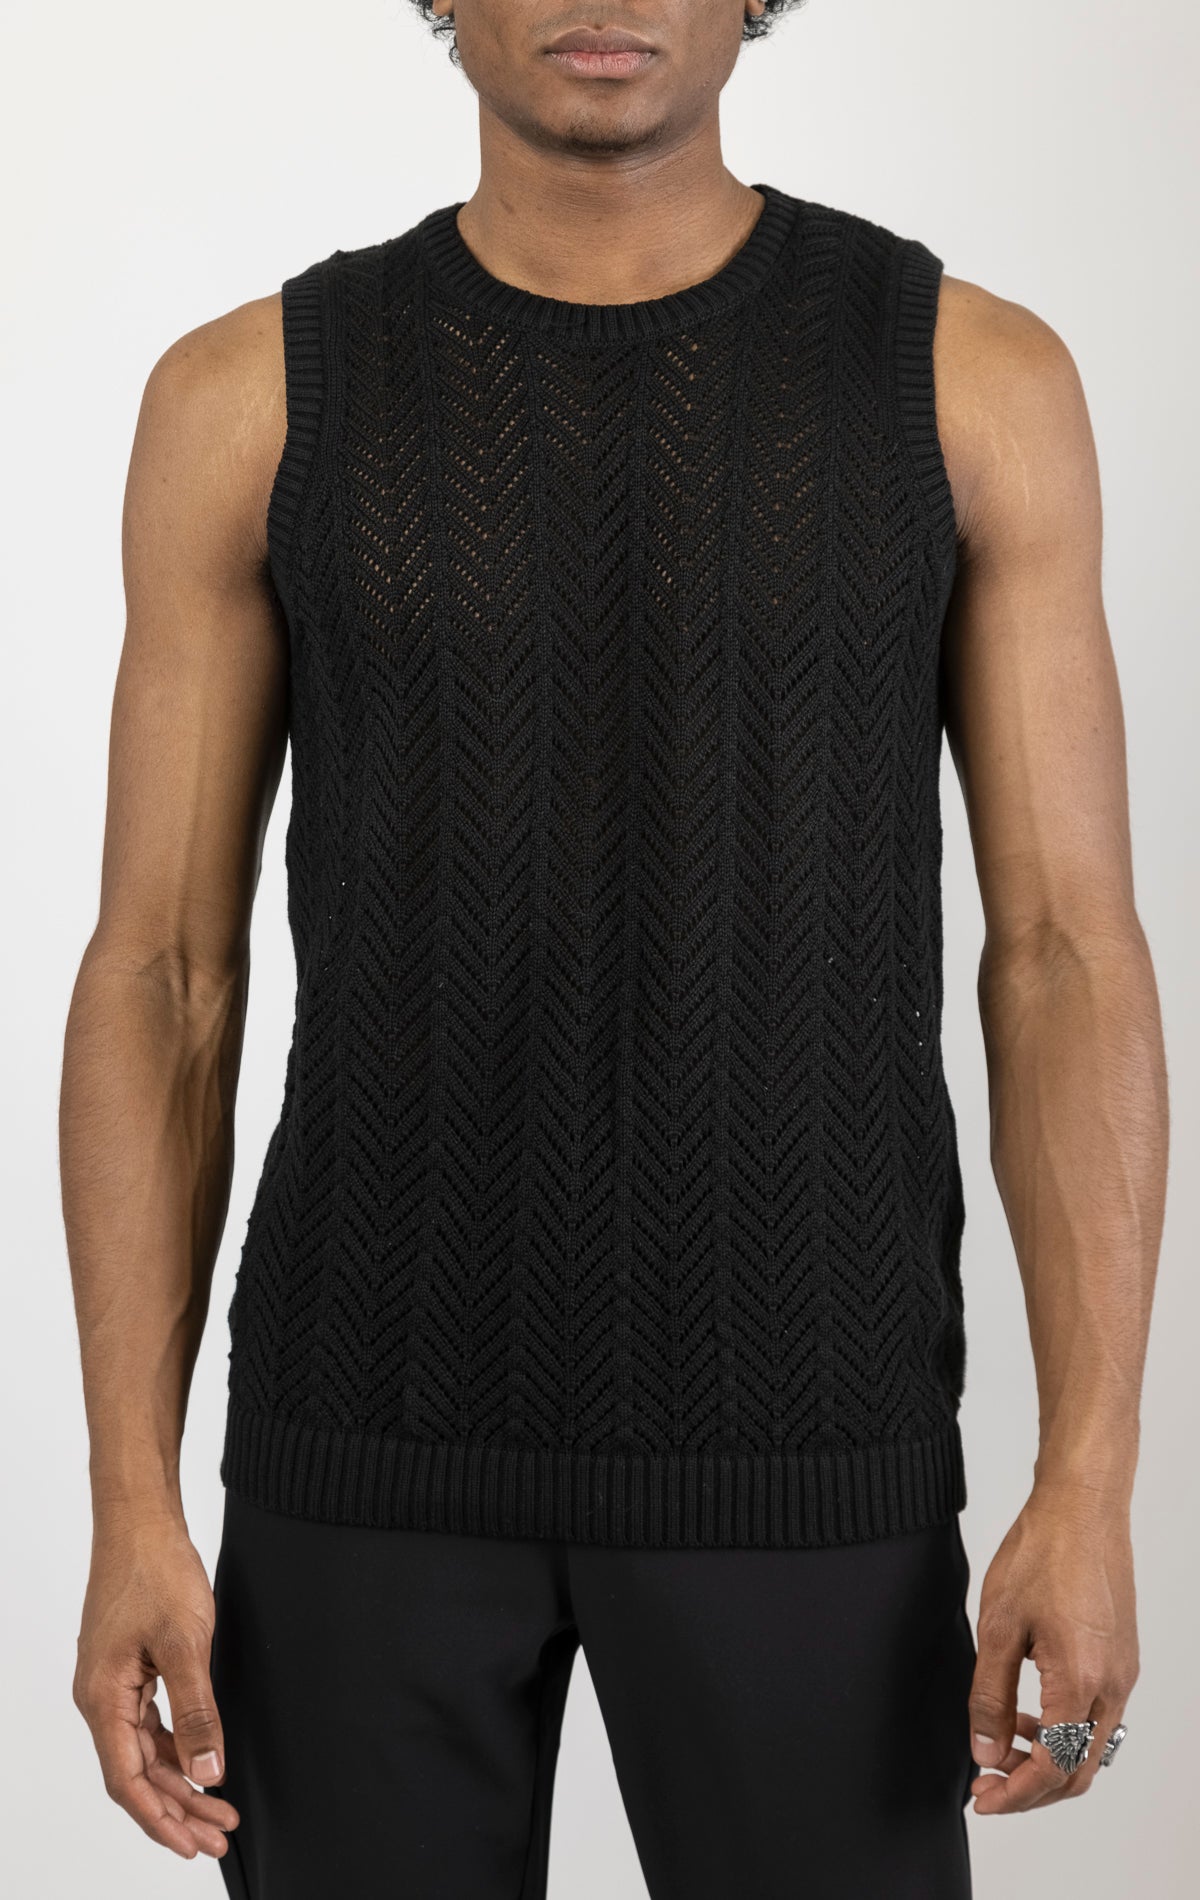 Men's knit muscle fit tank top in black. The tank top is made from a 50% cotton, 50% acrylic blend and features a muscle fit cut, sleeveless construction, and a textured knit fabric.